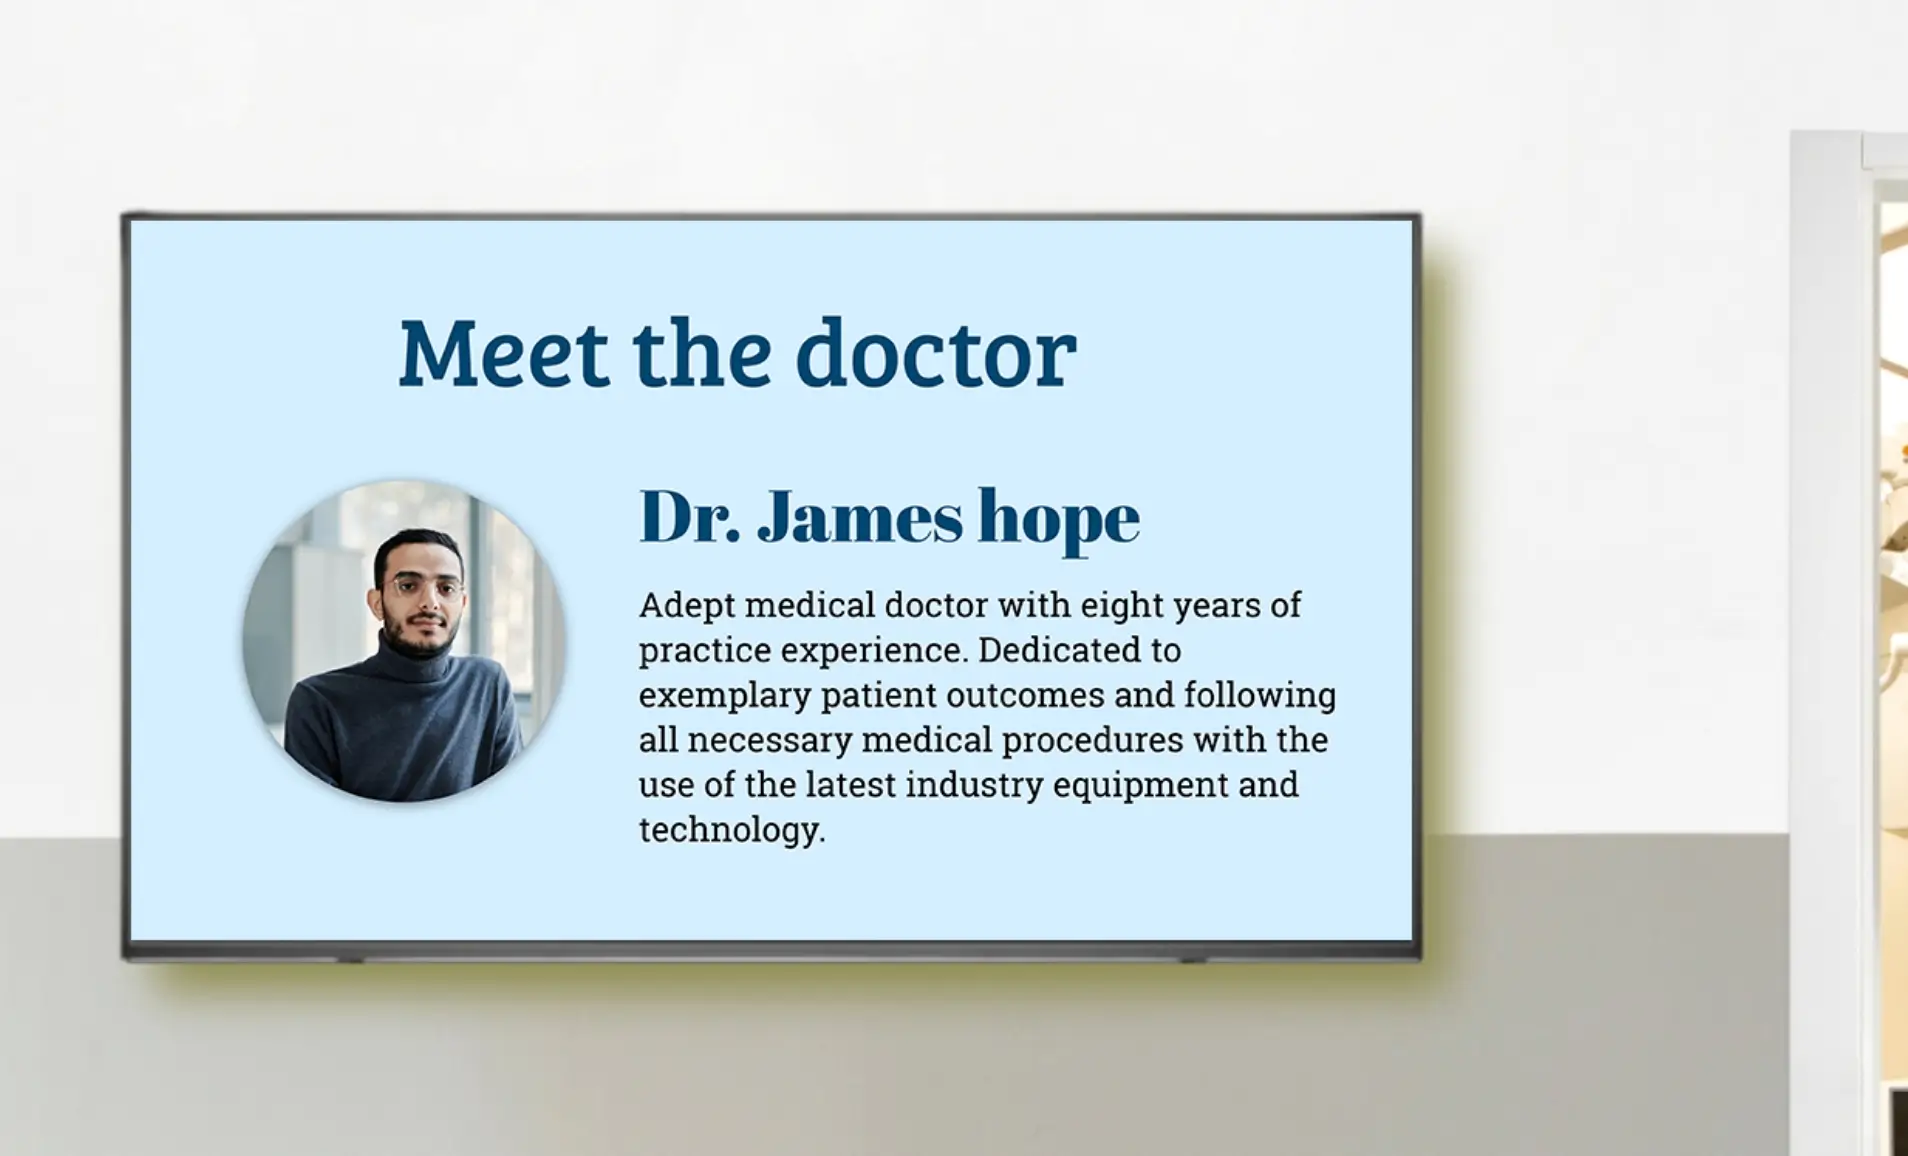 People Space App showing Doctor's information on the digital signage screen at a clinic